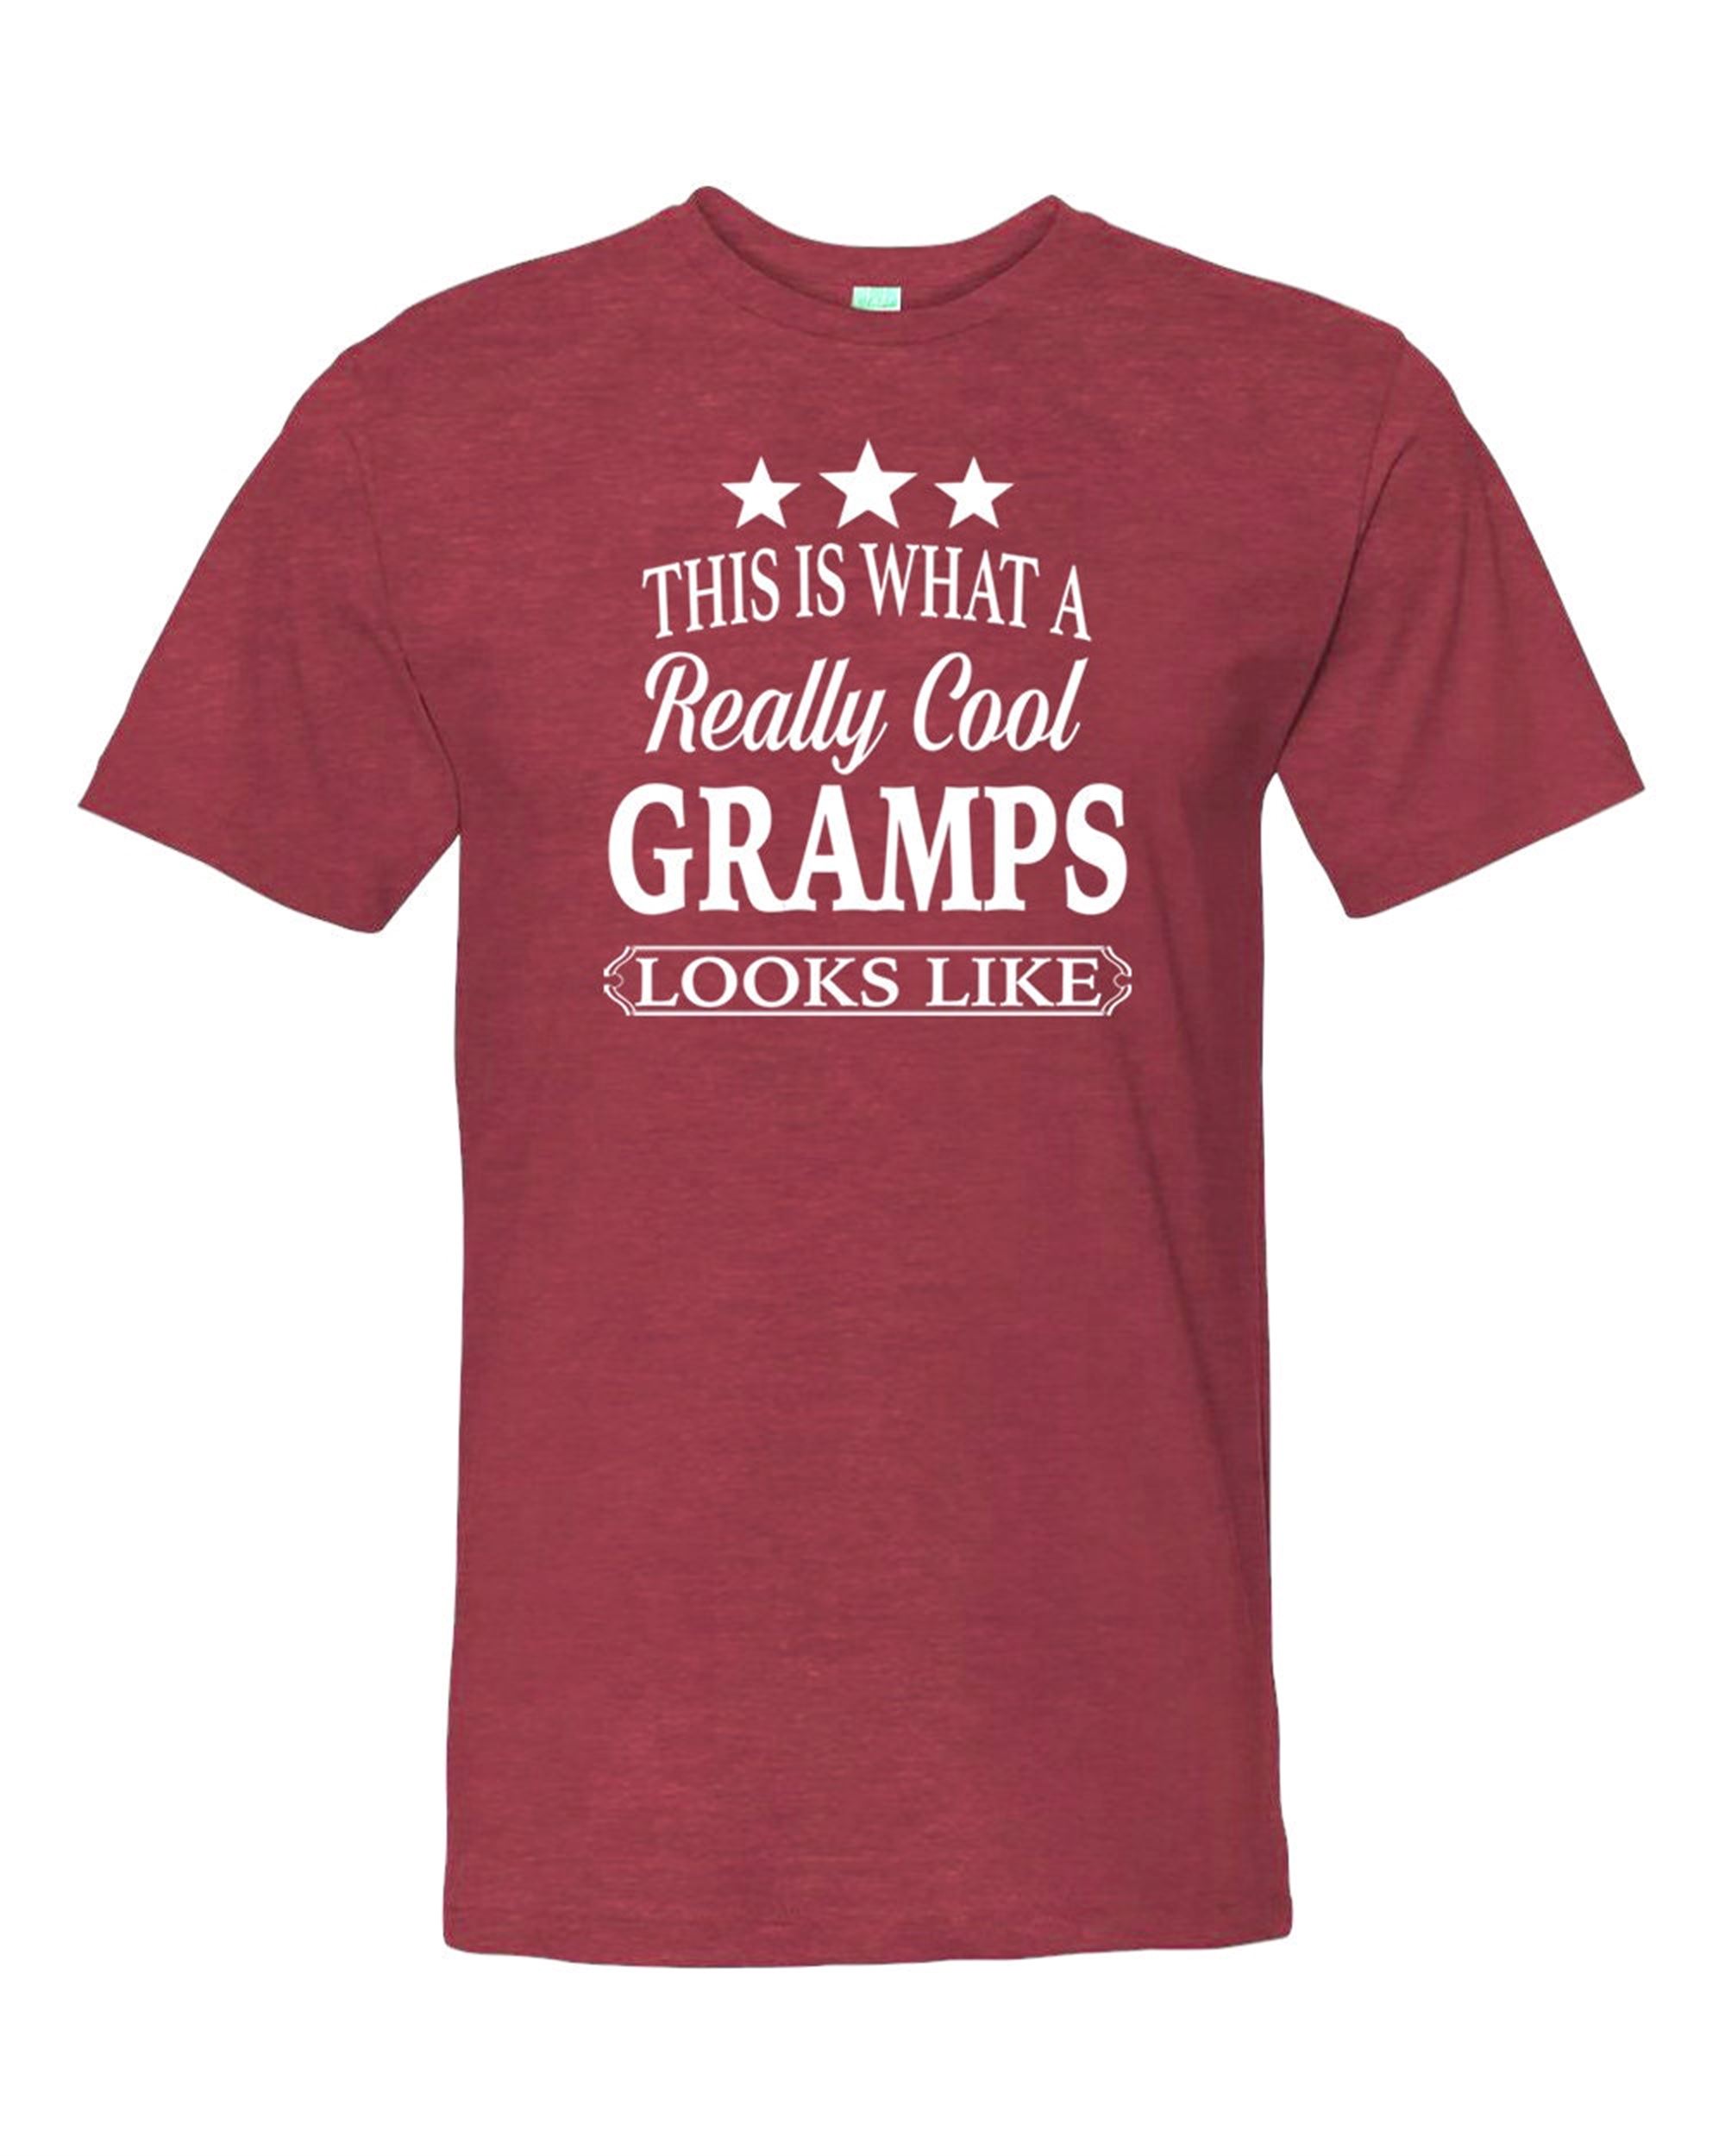 High Quality This Is What A Really Cool Gramps Looks Like - Unisex Shirt - Gramps Shirt - Gramps Gift 